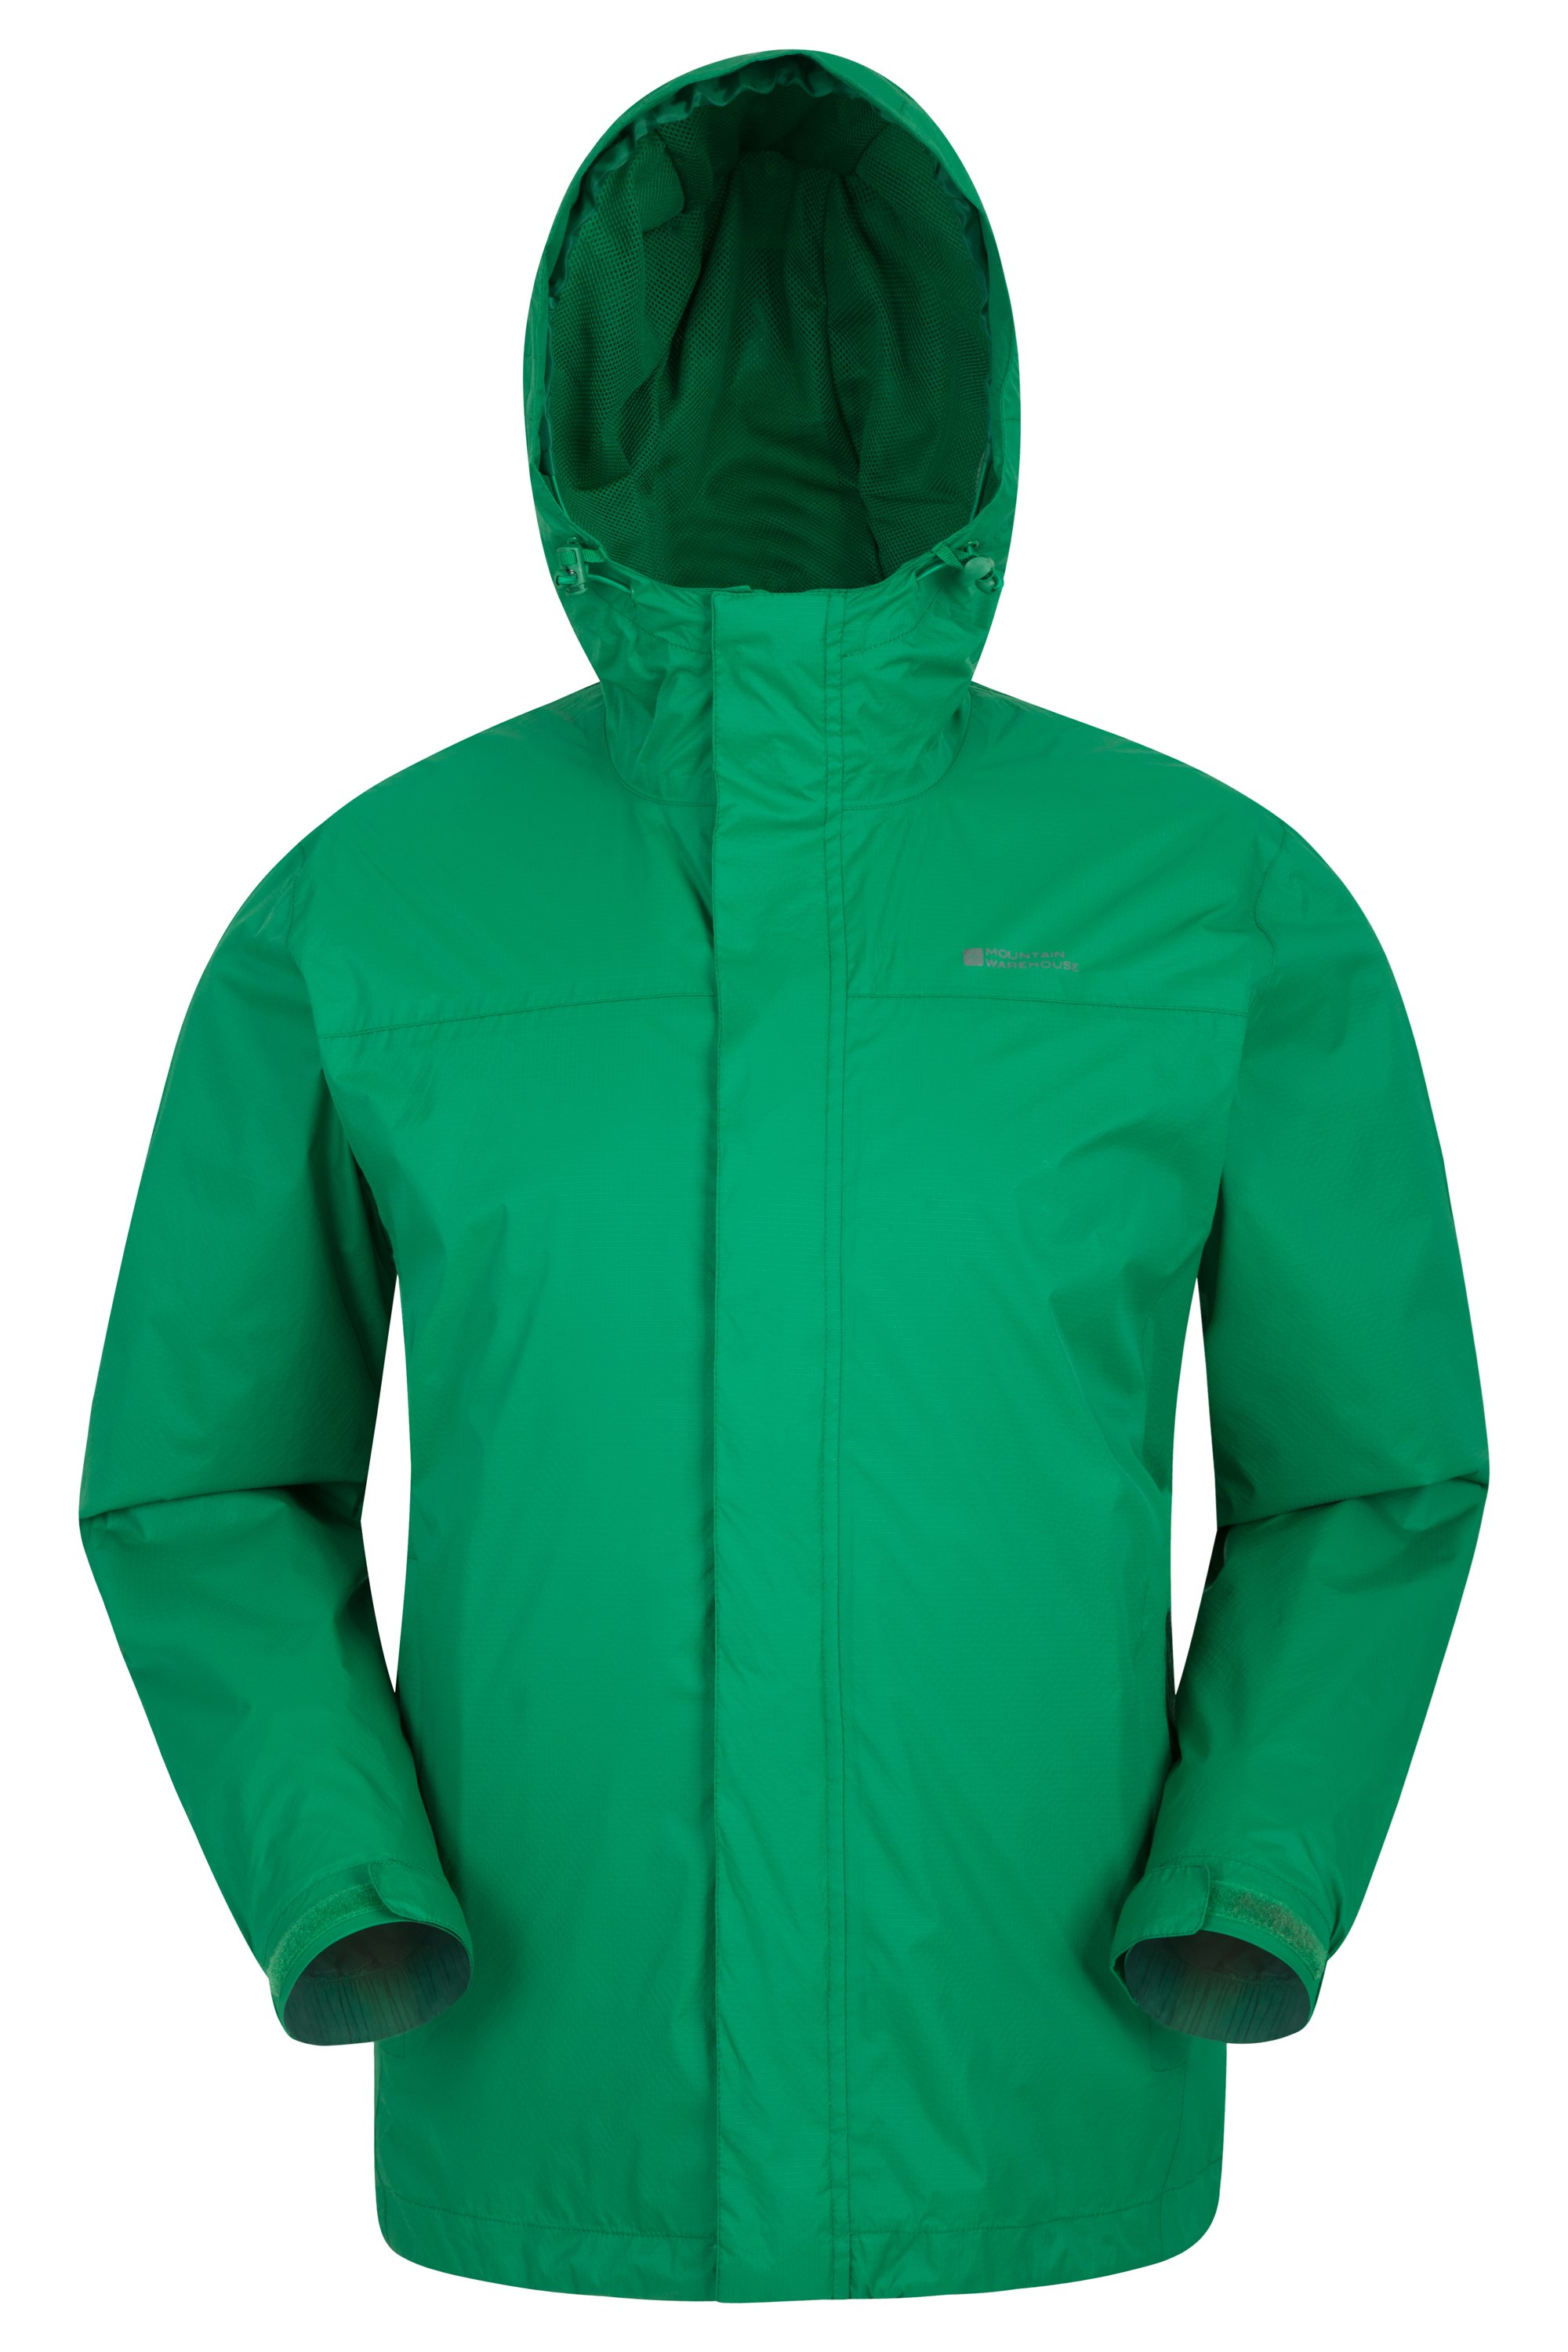 Details about   Mountain Warehouse Torrent Mens Waterproof Rain Jacket For Winter 